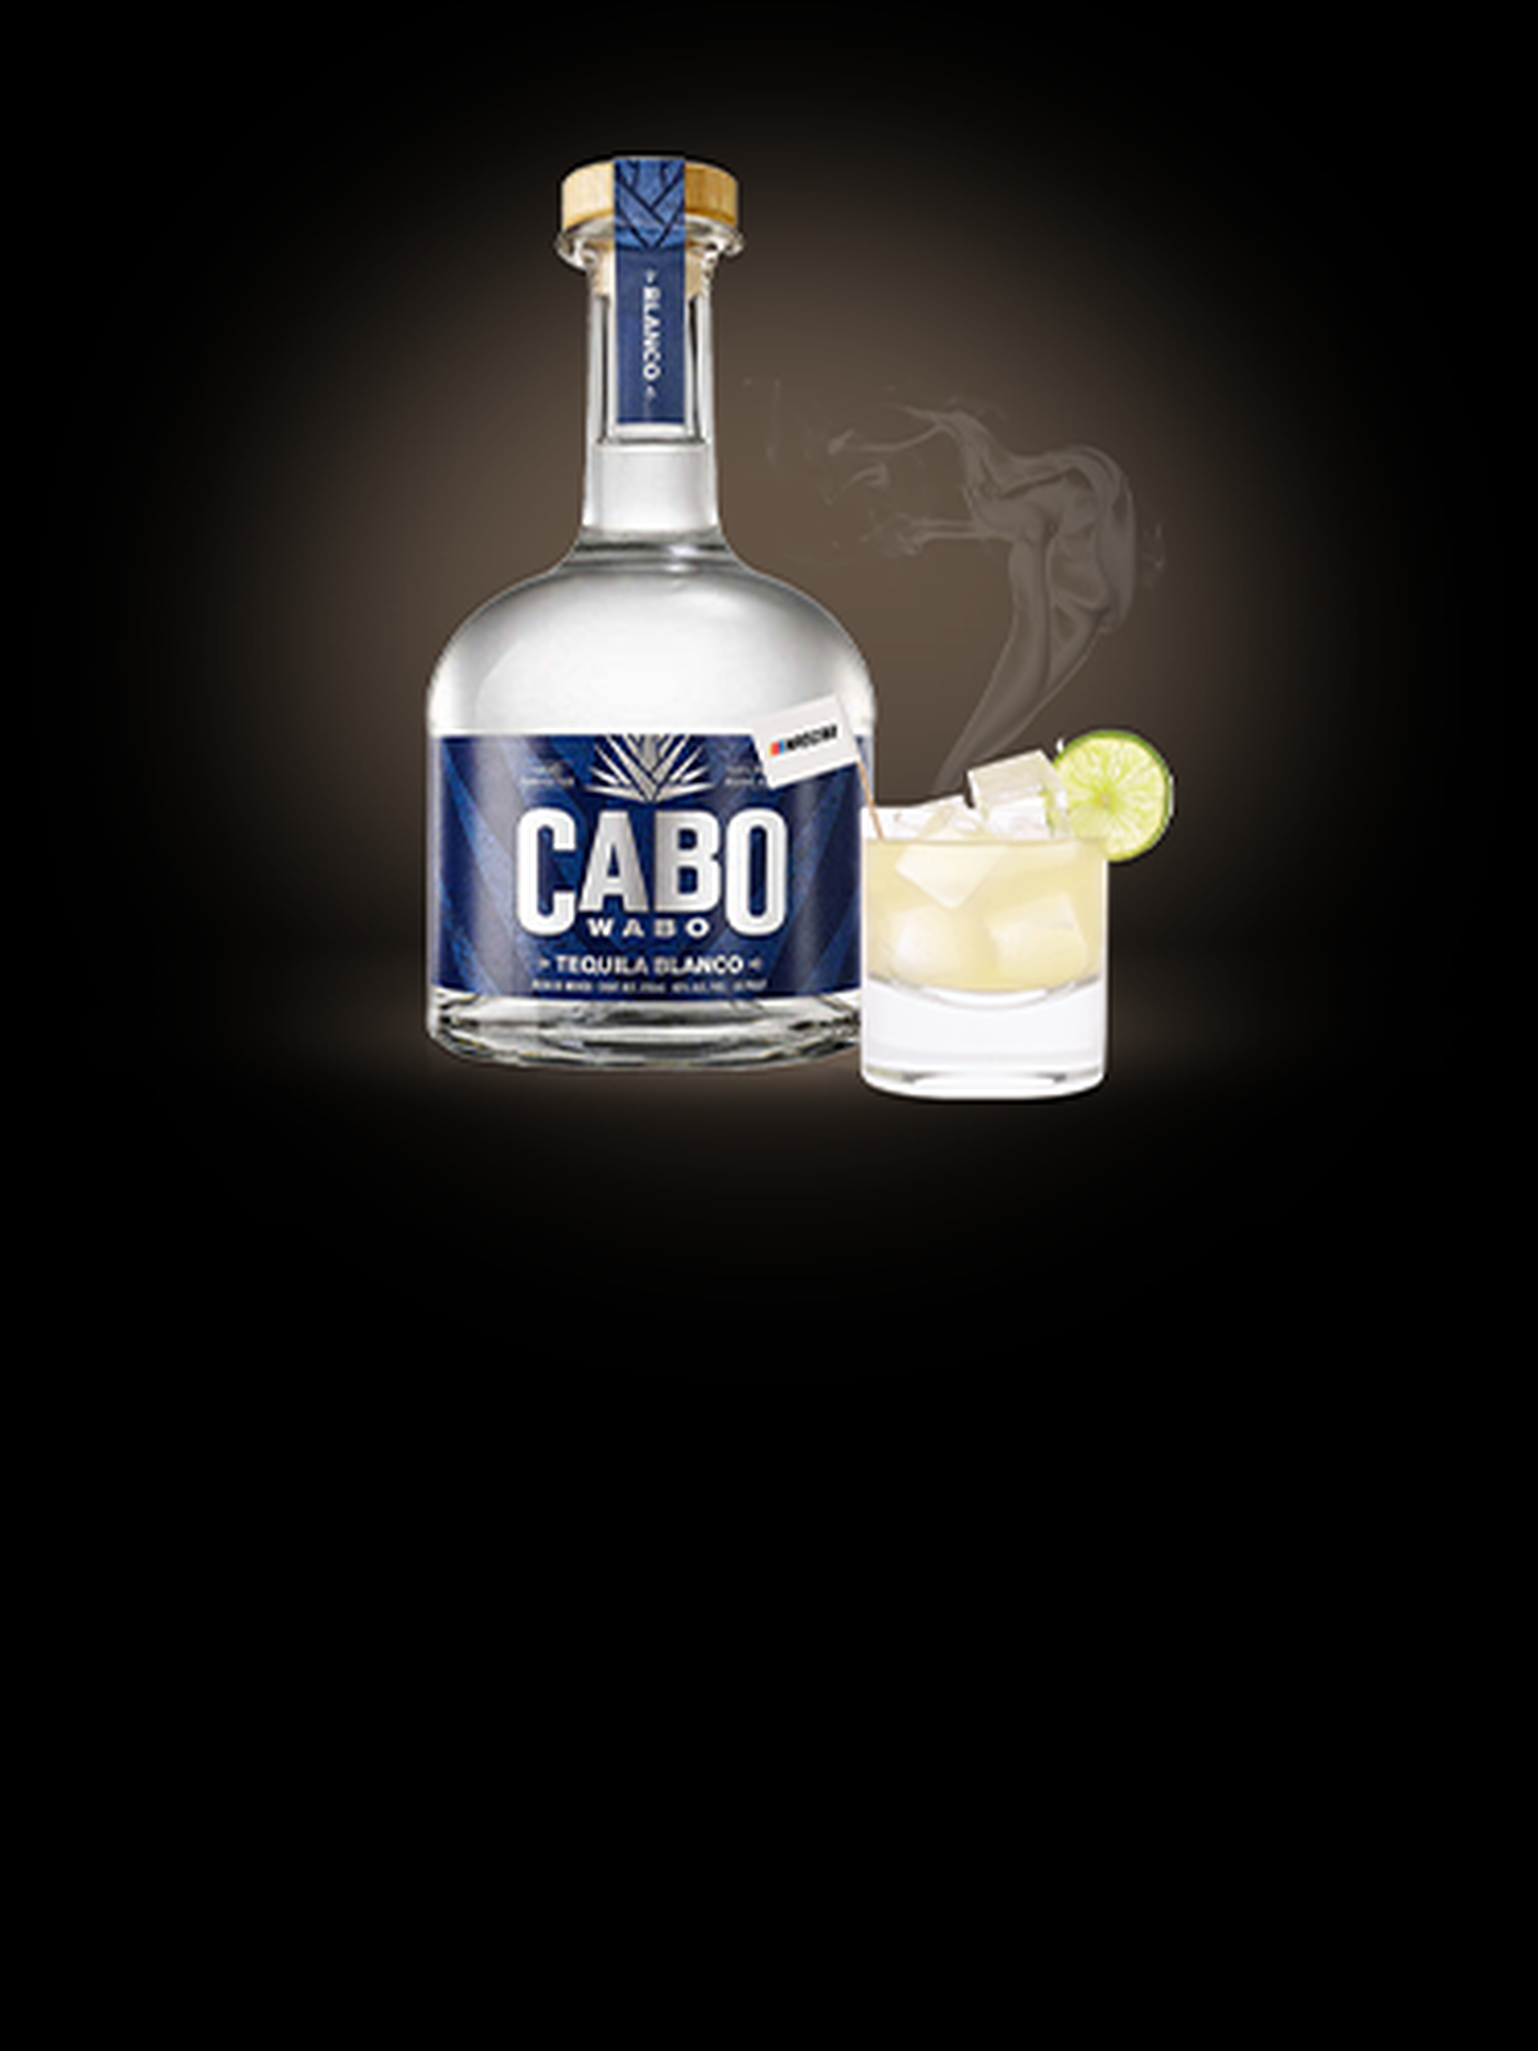 The Cabo Wabo Smokeshow Cocktail